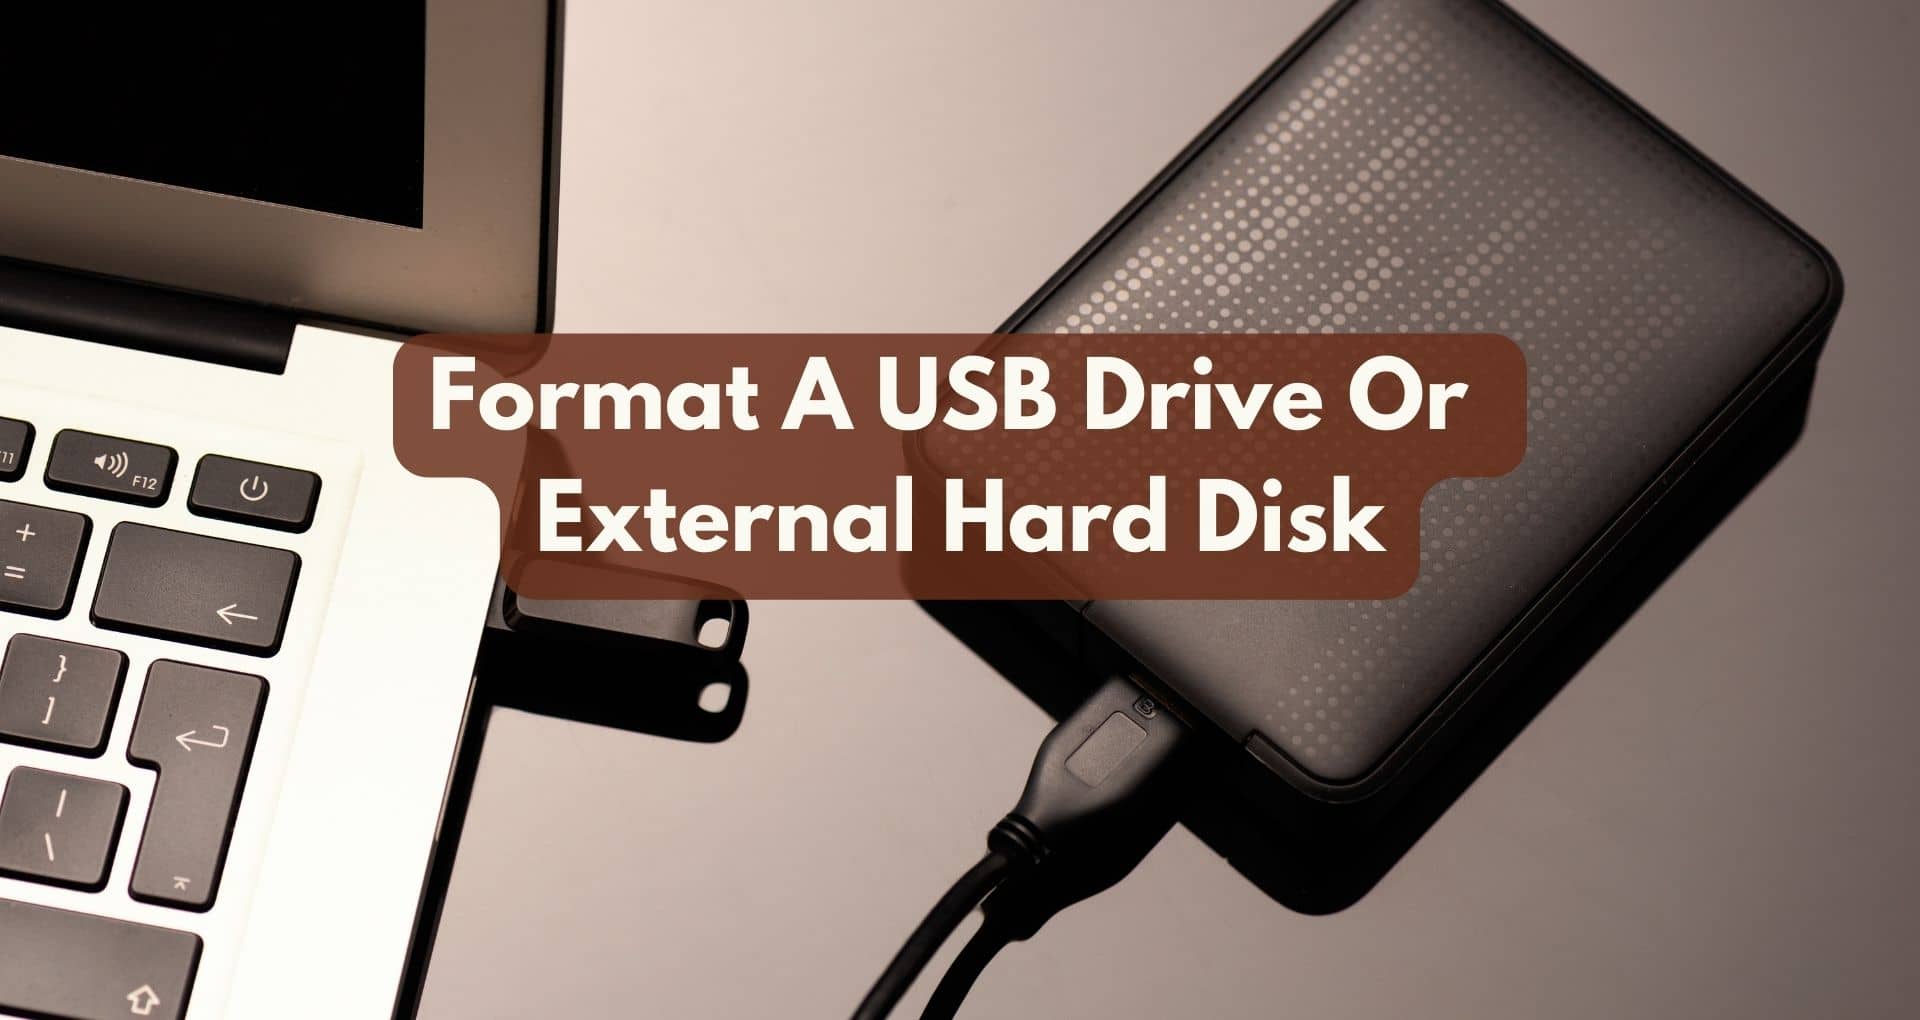 How To Format A USB Drive Or External Hard Disk?